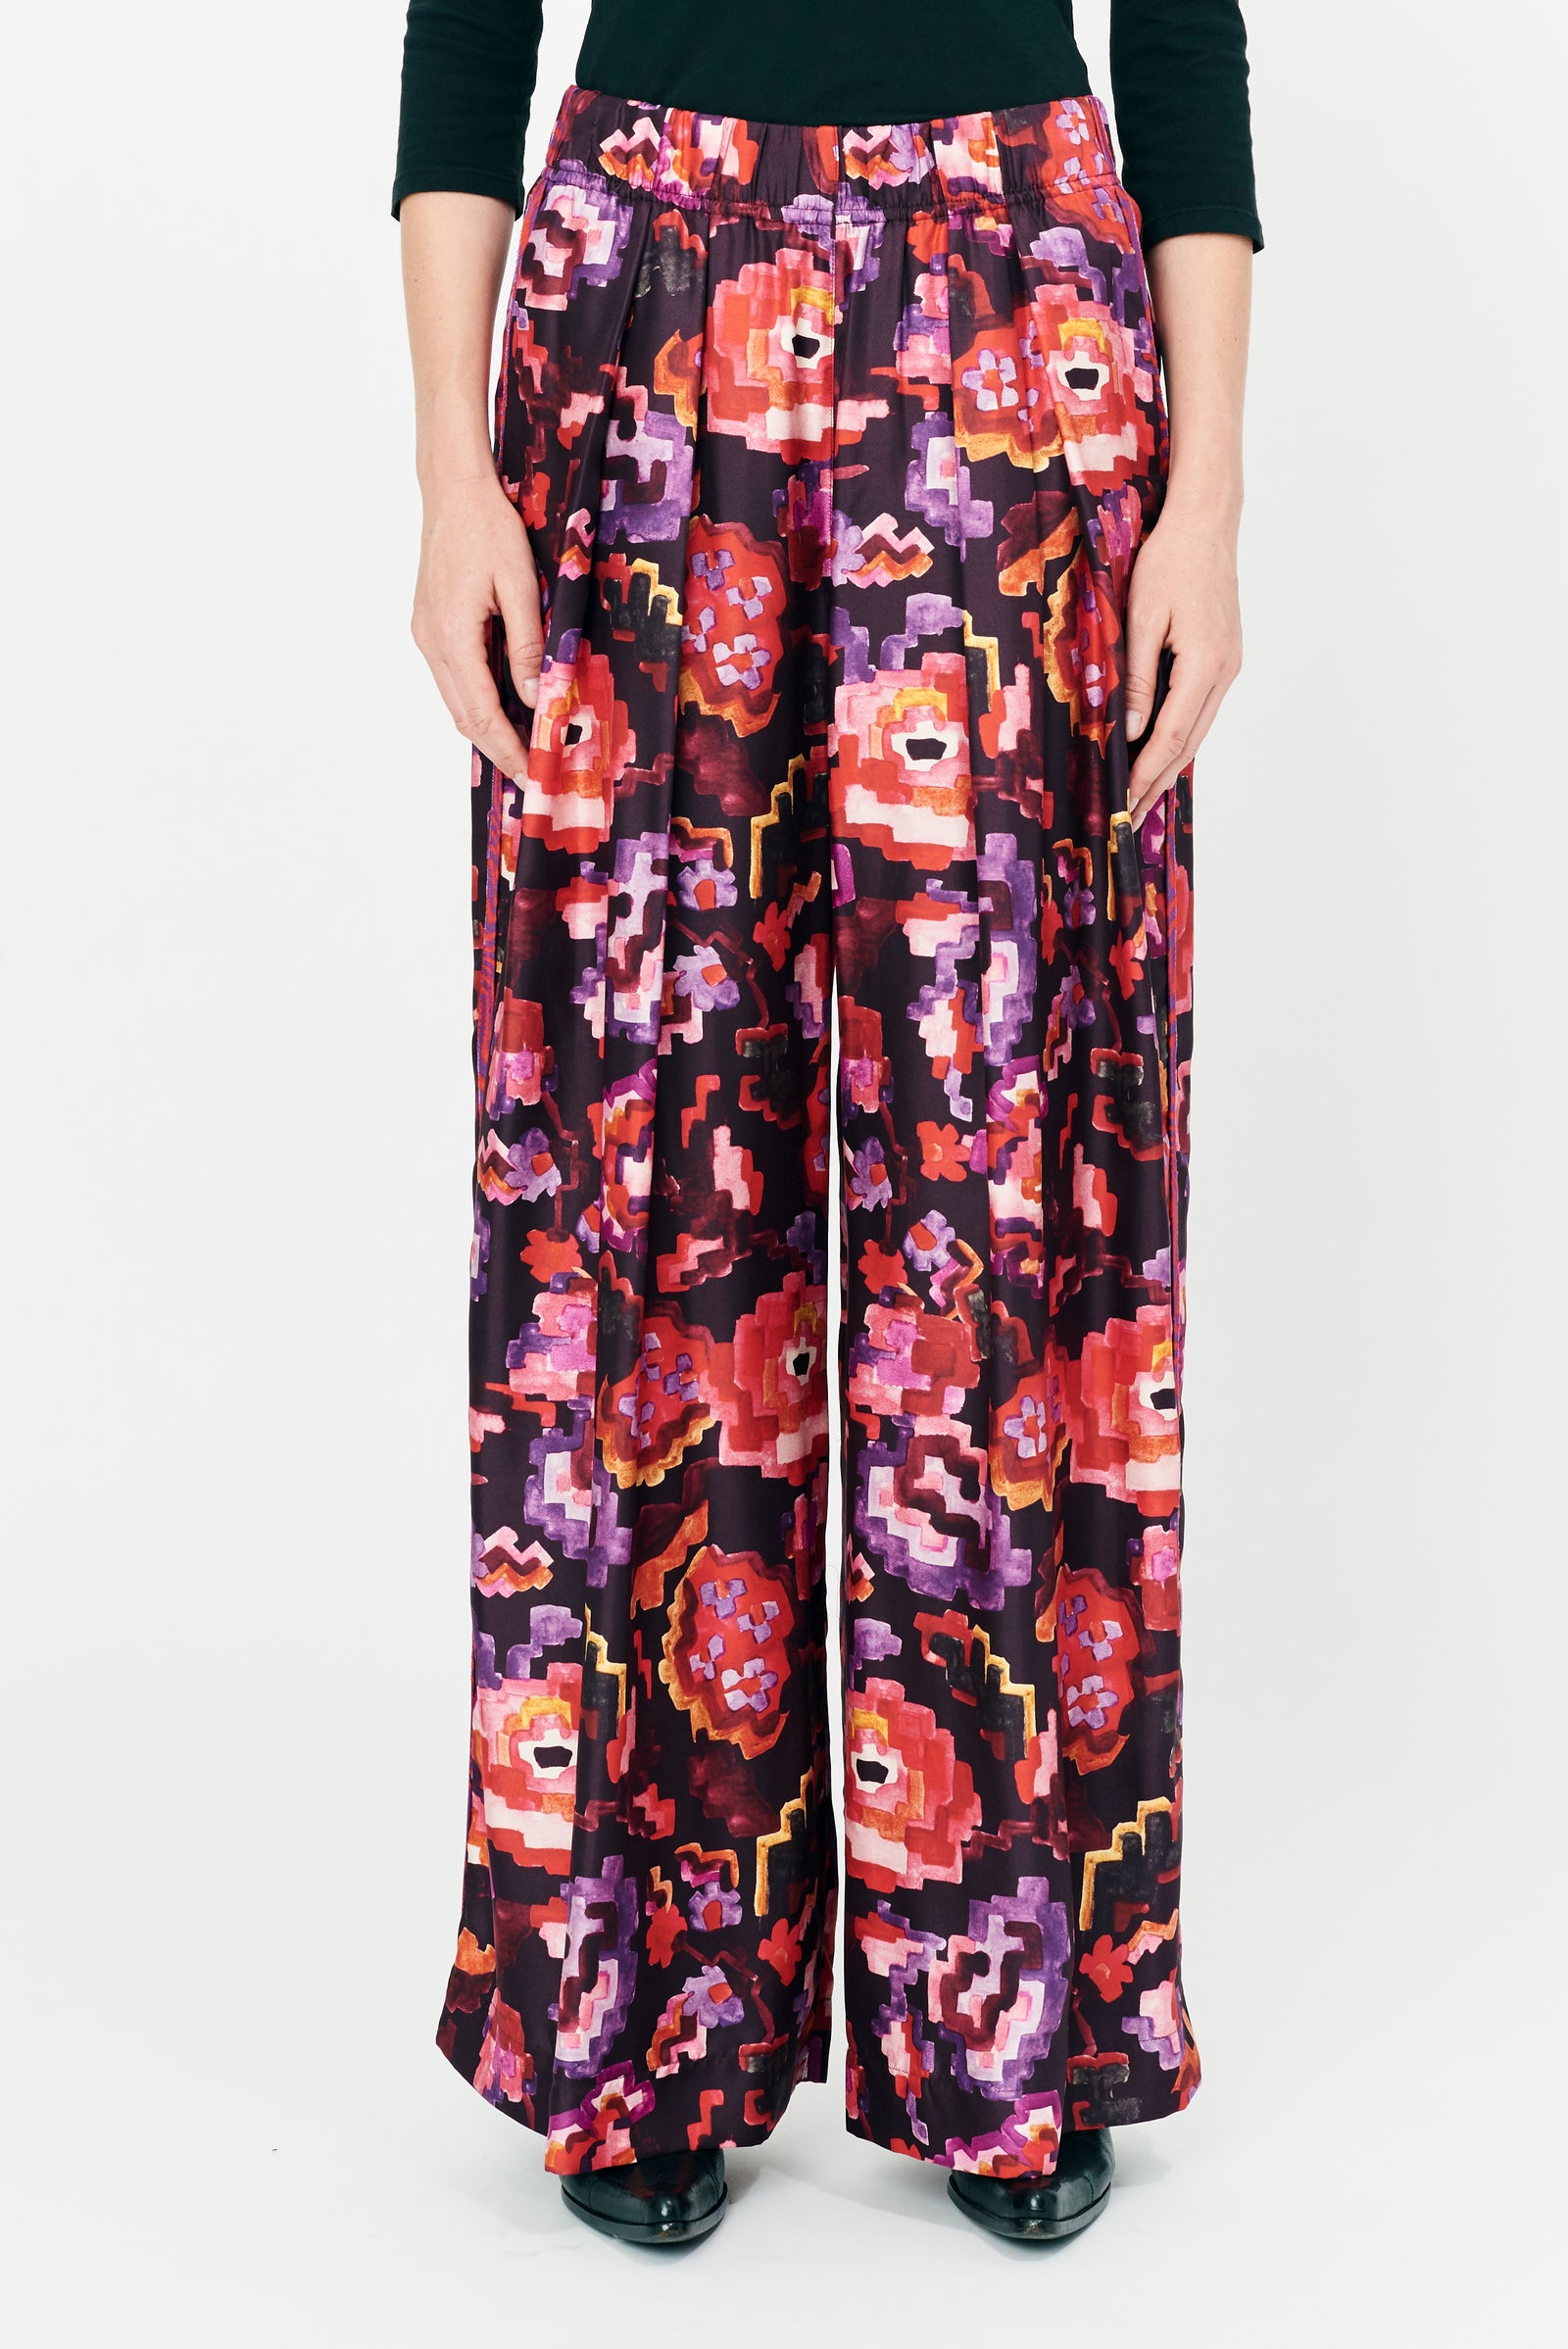 Painted Tapestry Fire Vibrations Silk Print Wide Leg Pant Front Close-Up View